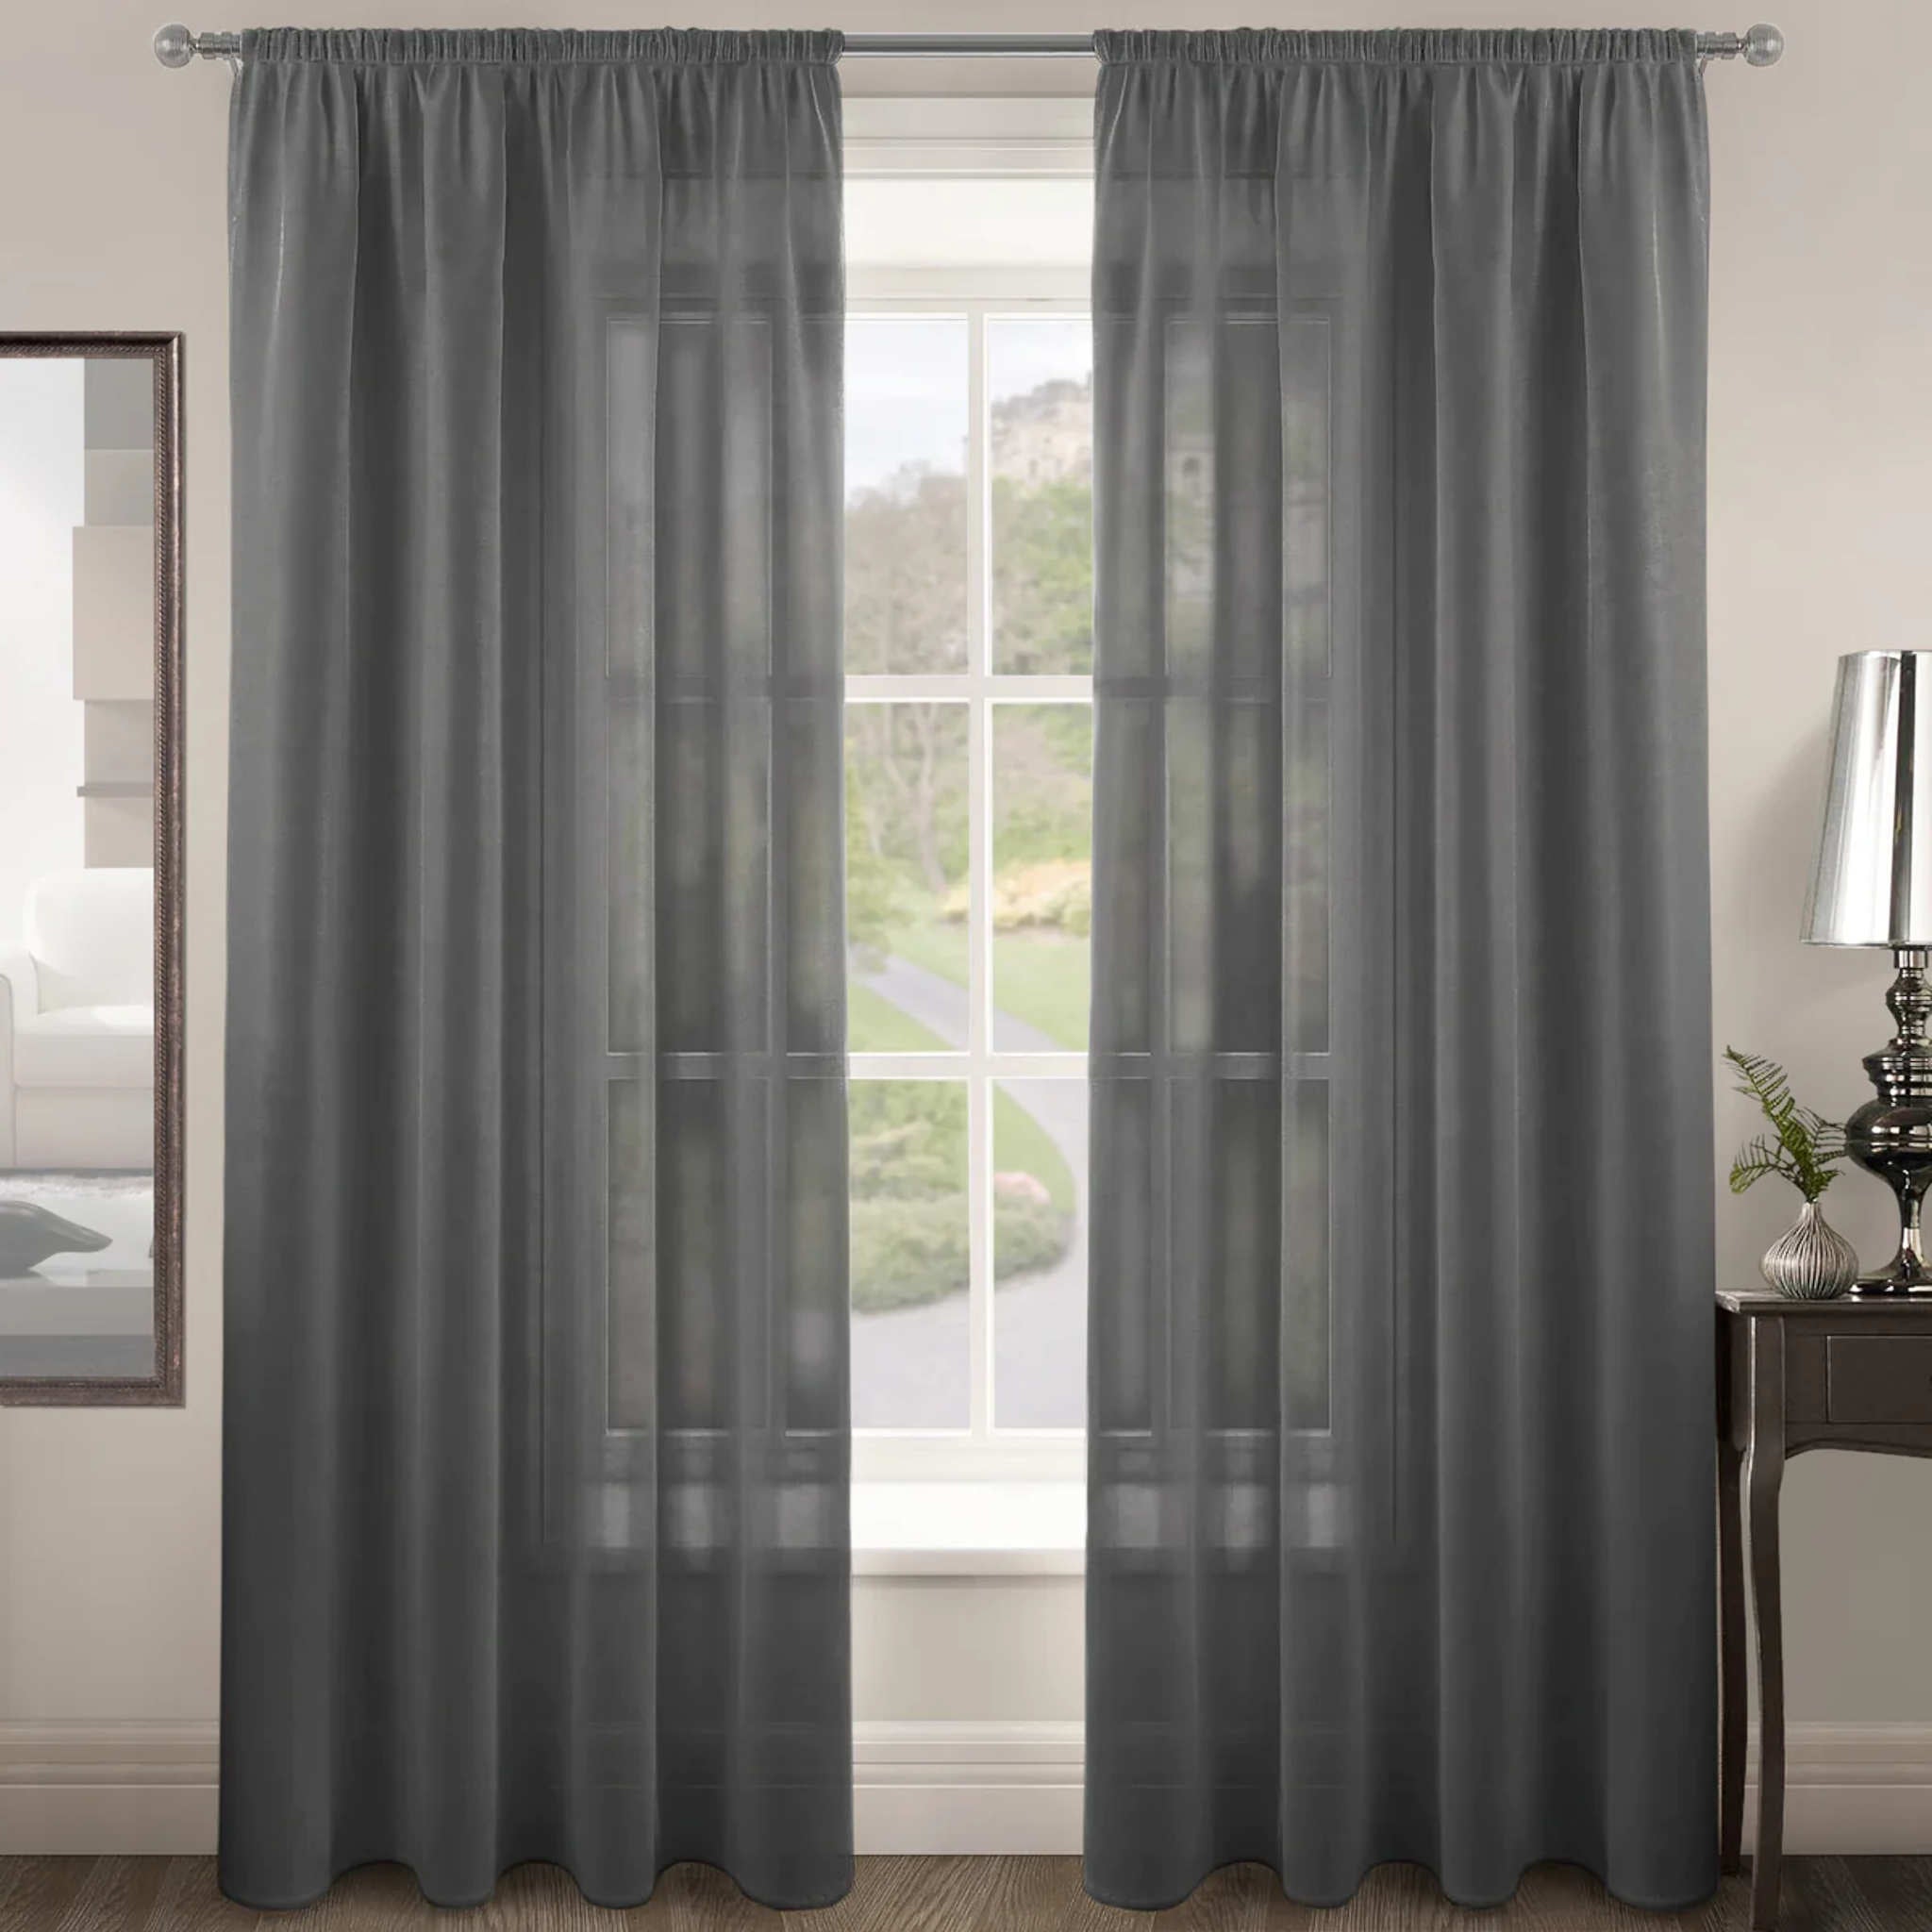 Intimates Riva Voile Panels Tape Top Curtains | 59x72in